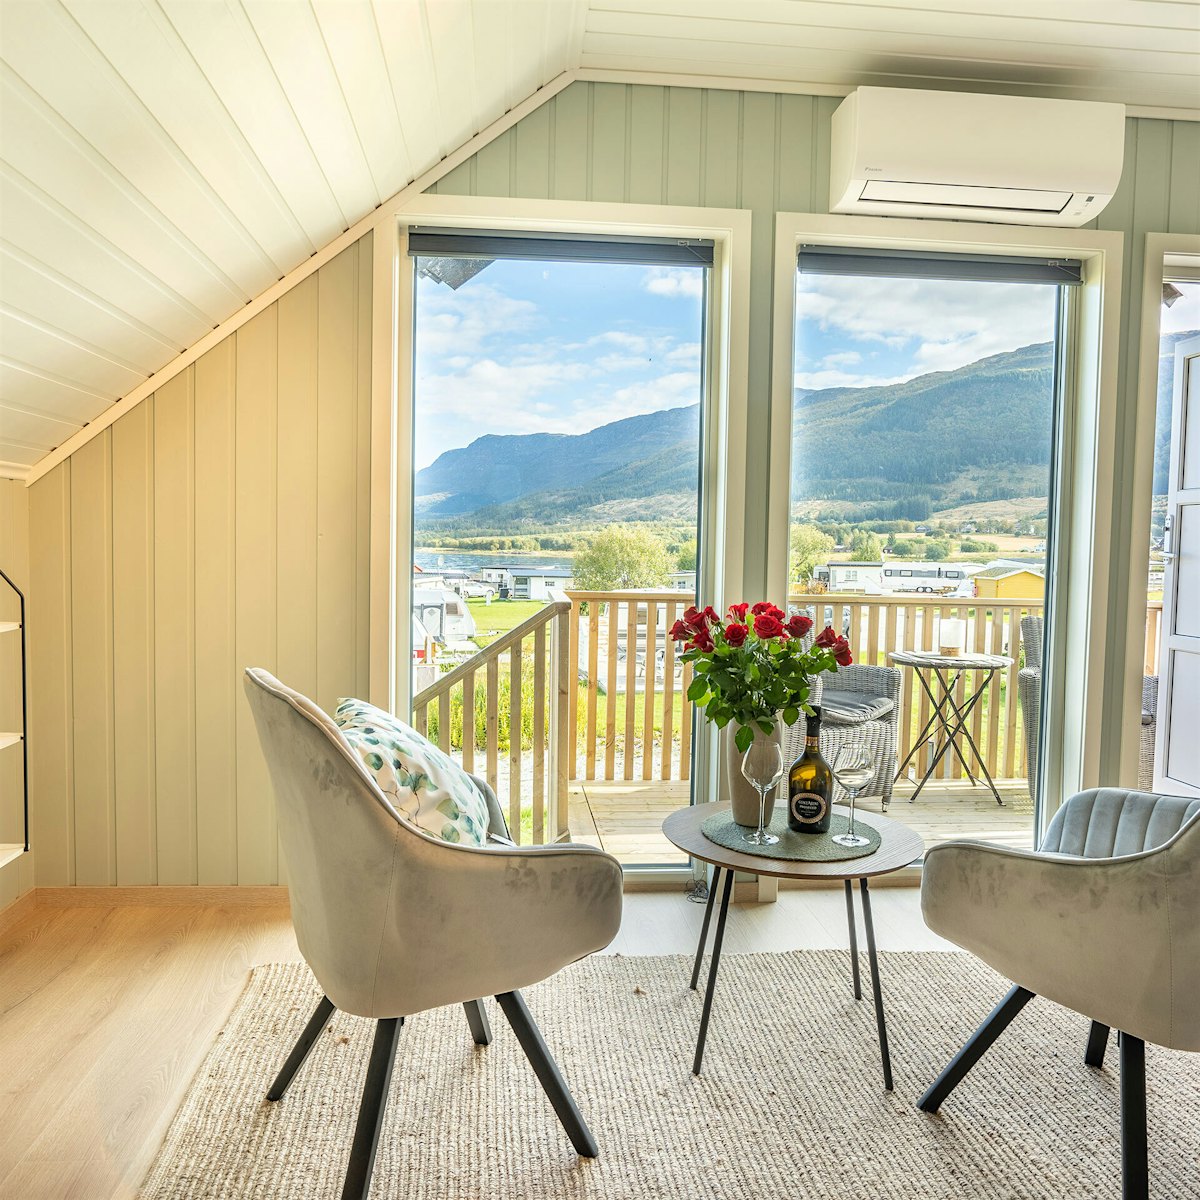 Bright and modern living room with large windows, two chairs and a table with roses on it. View over mountains and sea. Photo